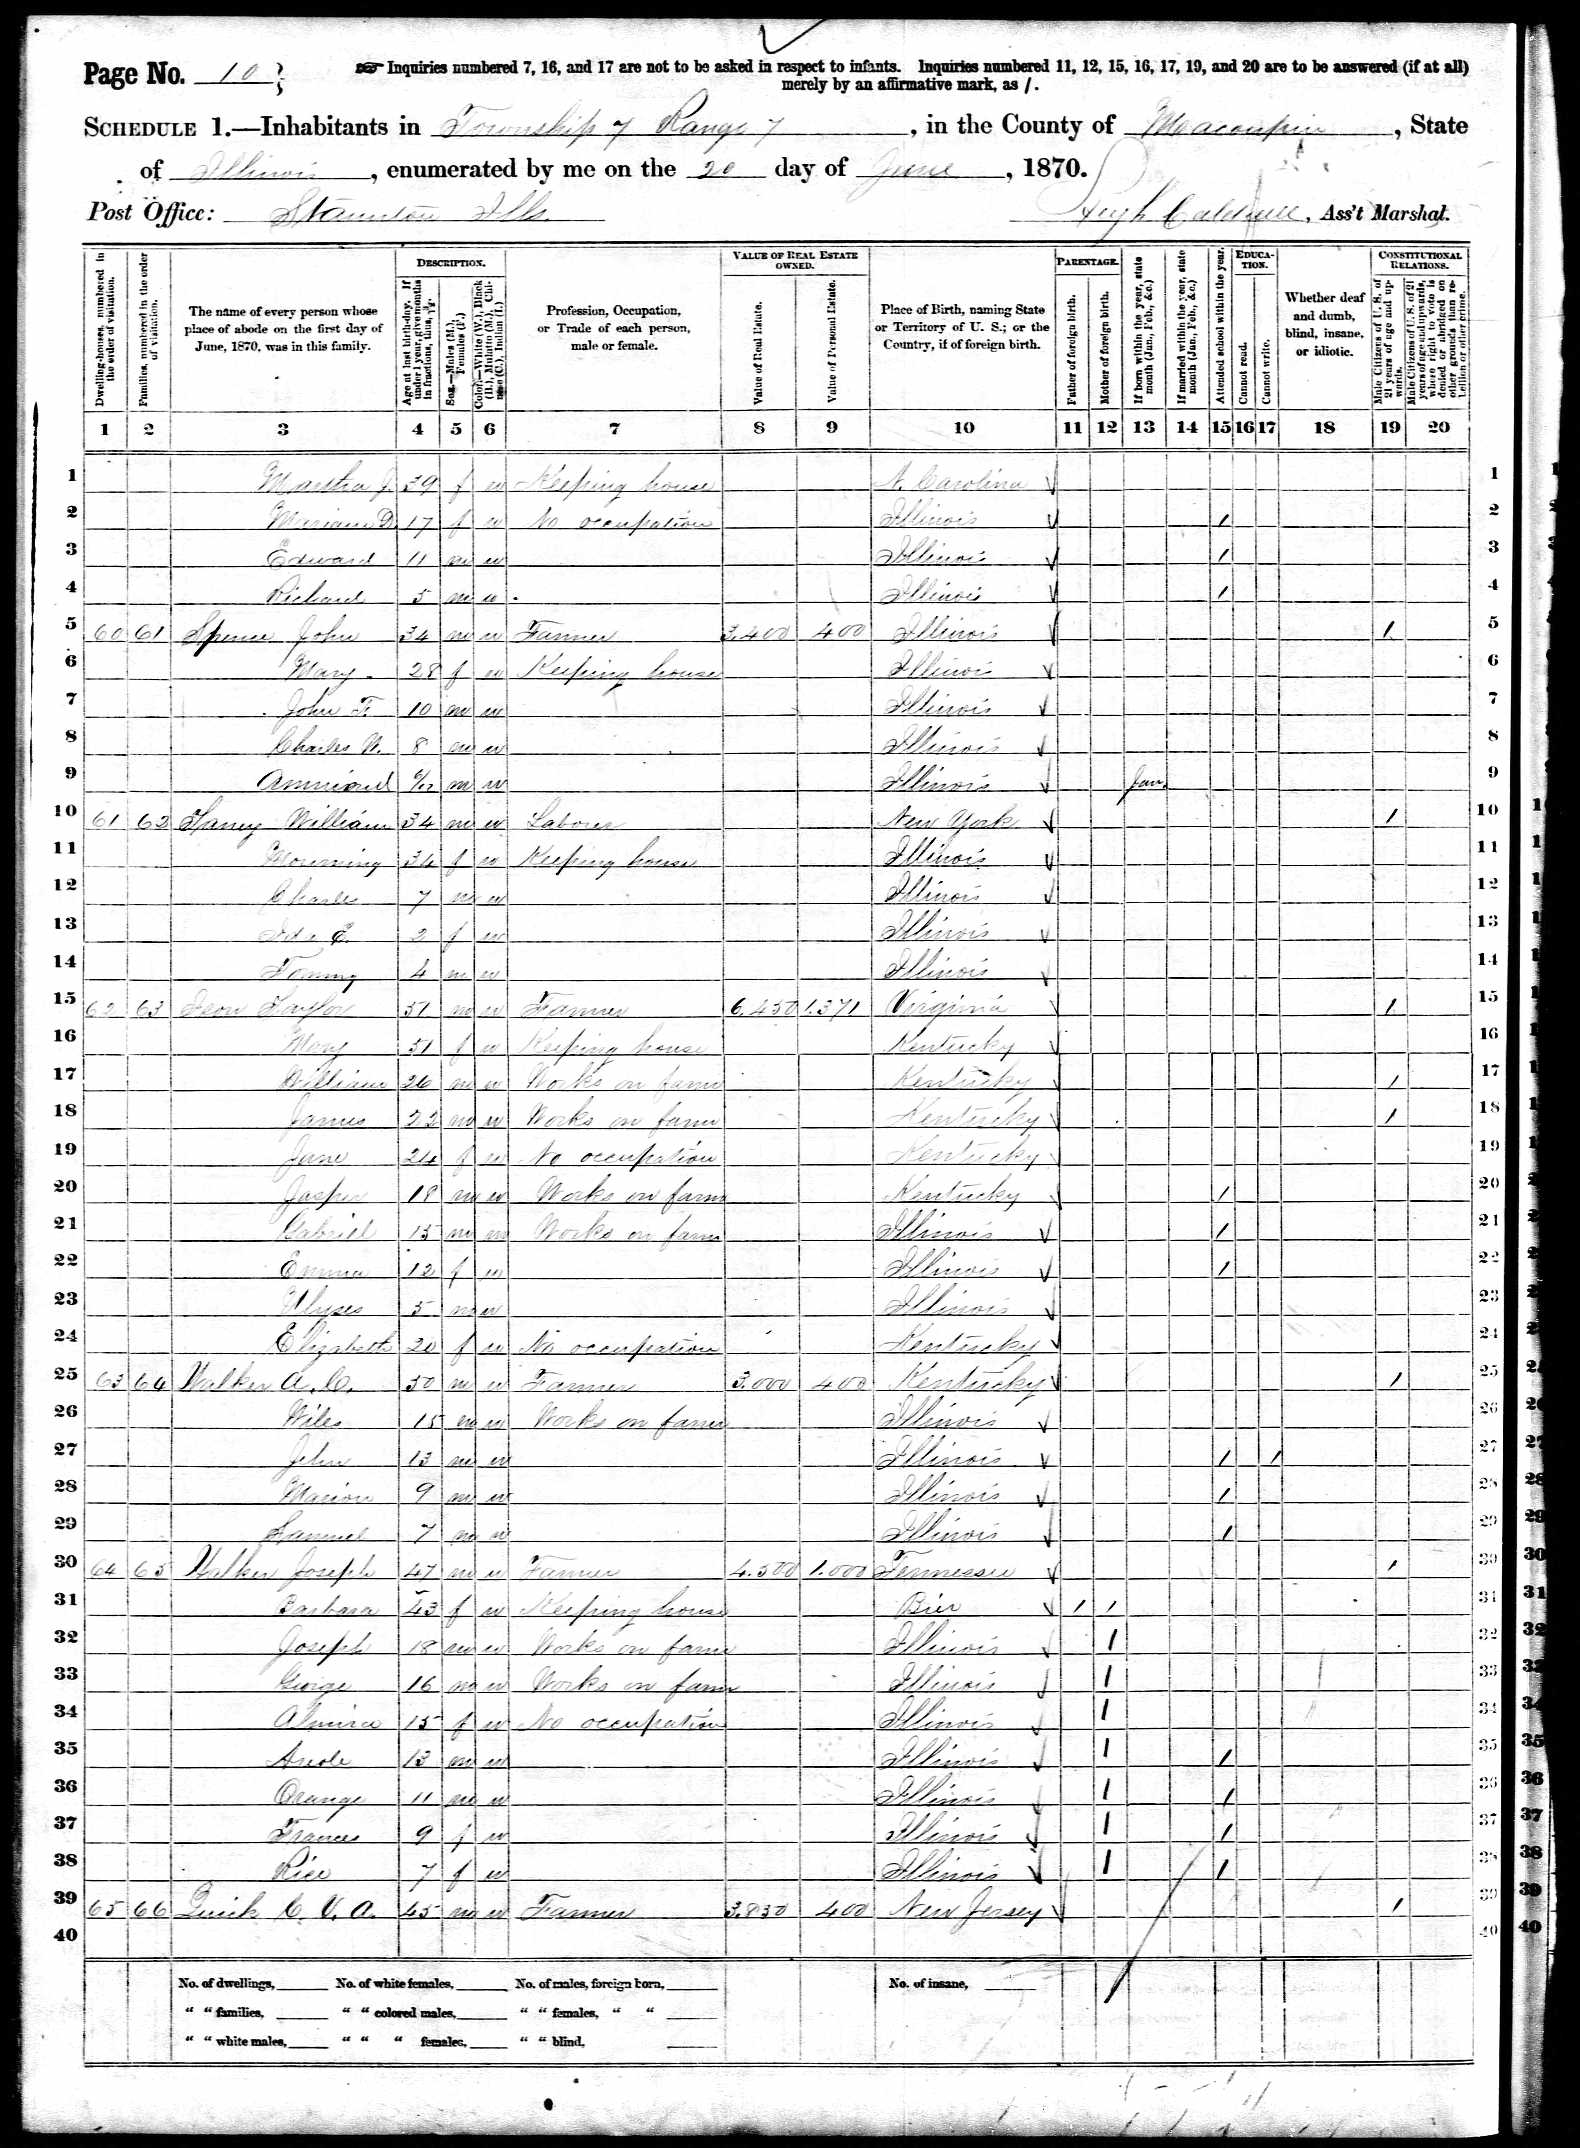 Joseph Walker (likely son of Jacob and Agnes), 1870 Macoupin County, Illinois, census